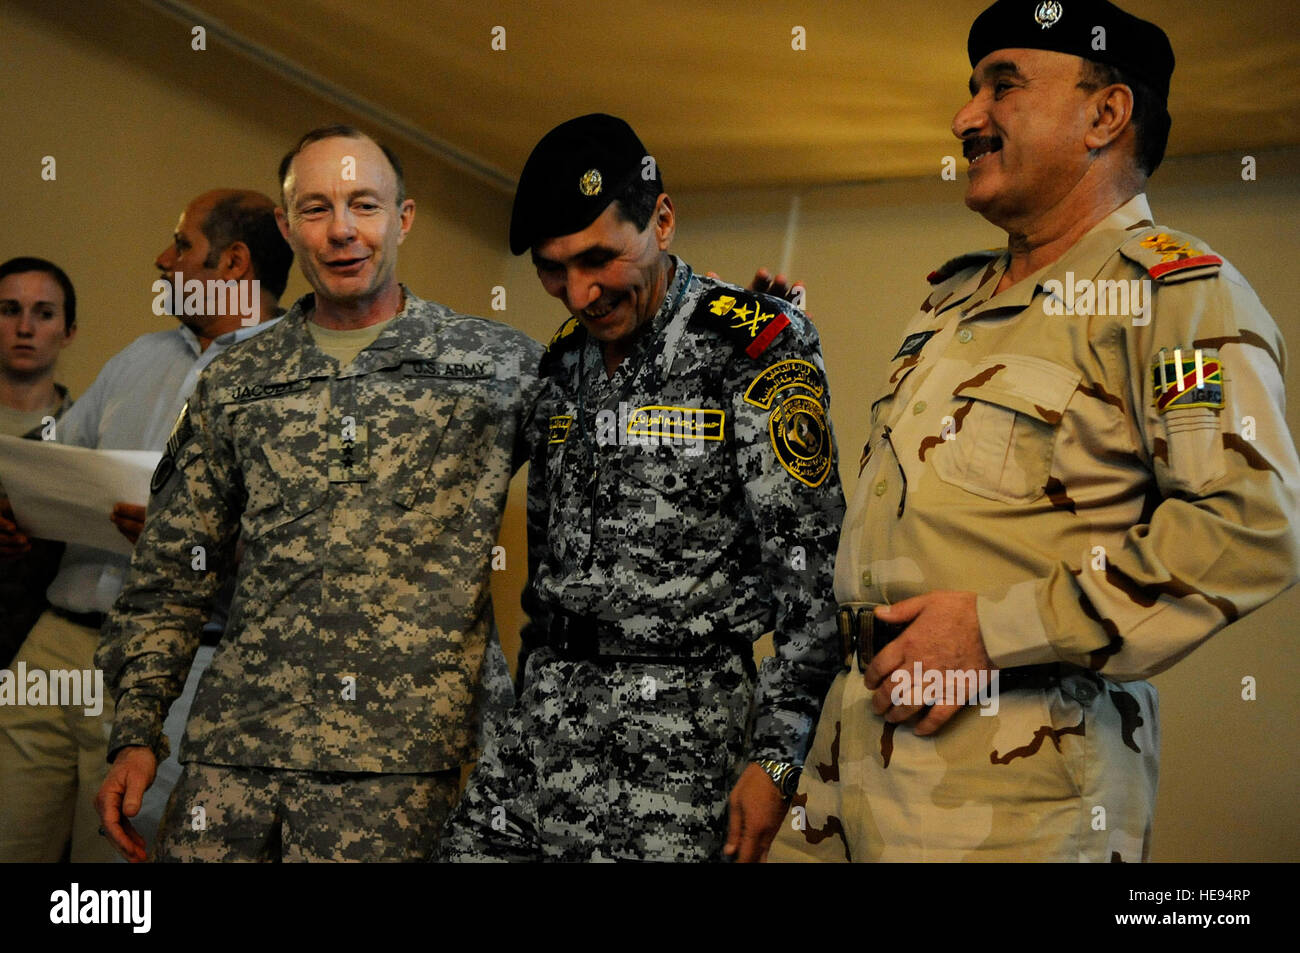 U.S. Army Lt. Gen. Charles Jacoby, Commander, Multi-National Corps - Iraq, Gen. Hussen Al Auadi, Commander, Iraqi federal police, and Gen. Ali Ghaidan, commander of the Iraqi army's ground forces, enjoy a laugh during an awards ceremony at Forward Operating Base Diamondback in Mosul, Iraq, Aug. 4.  Jacoby's visit recognizes the continuing partnership between Iraqi security forces and coalition forces throughout northern Iraq. Stock Photo